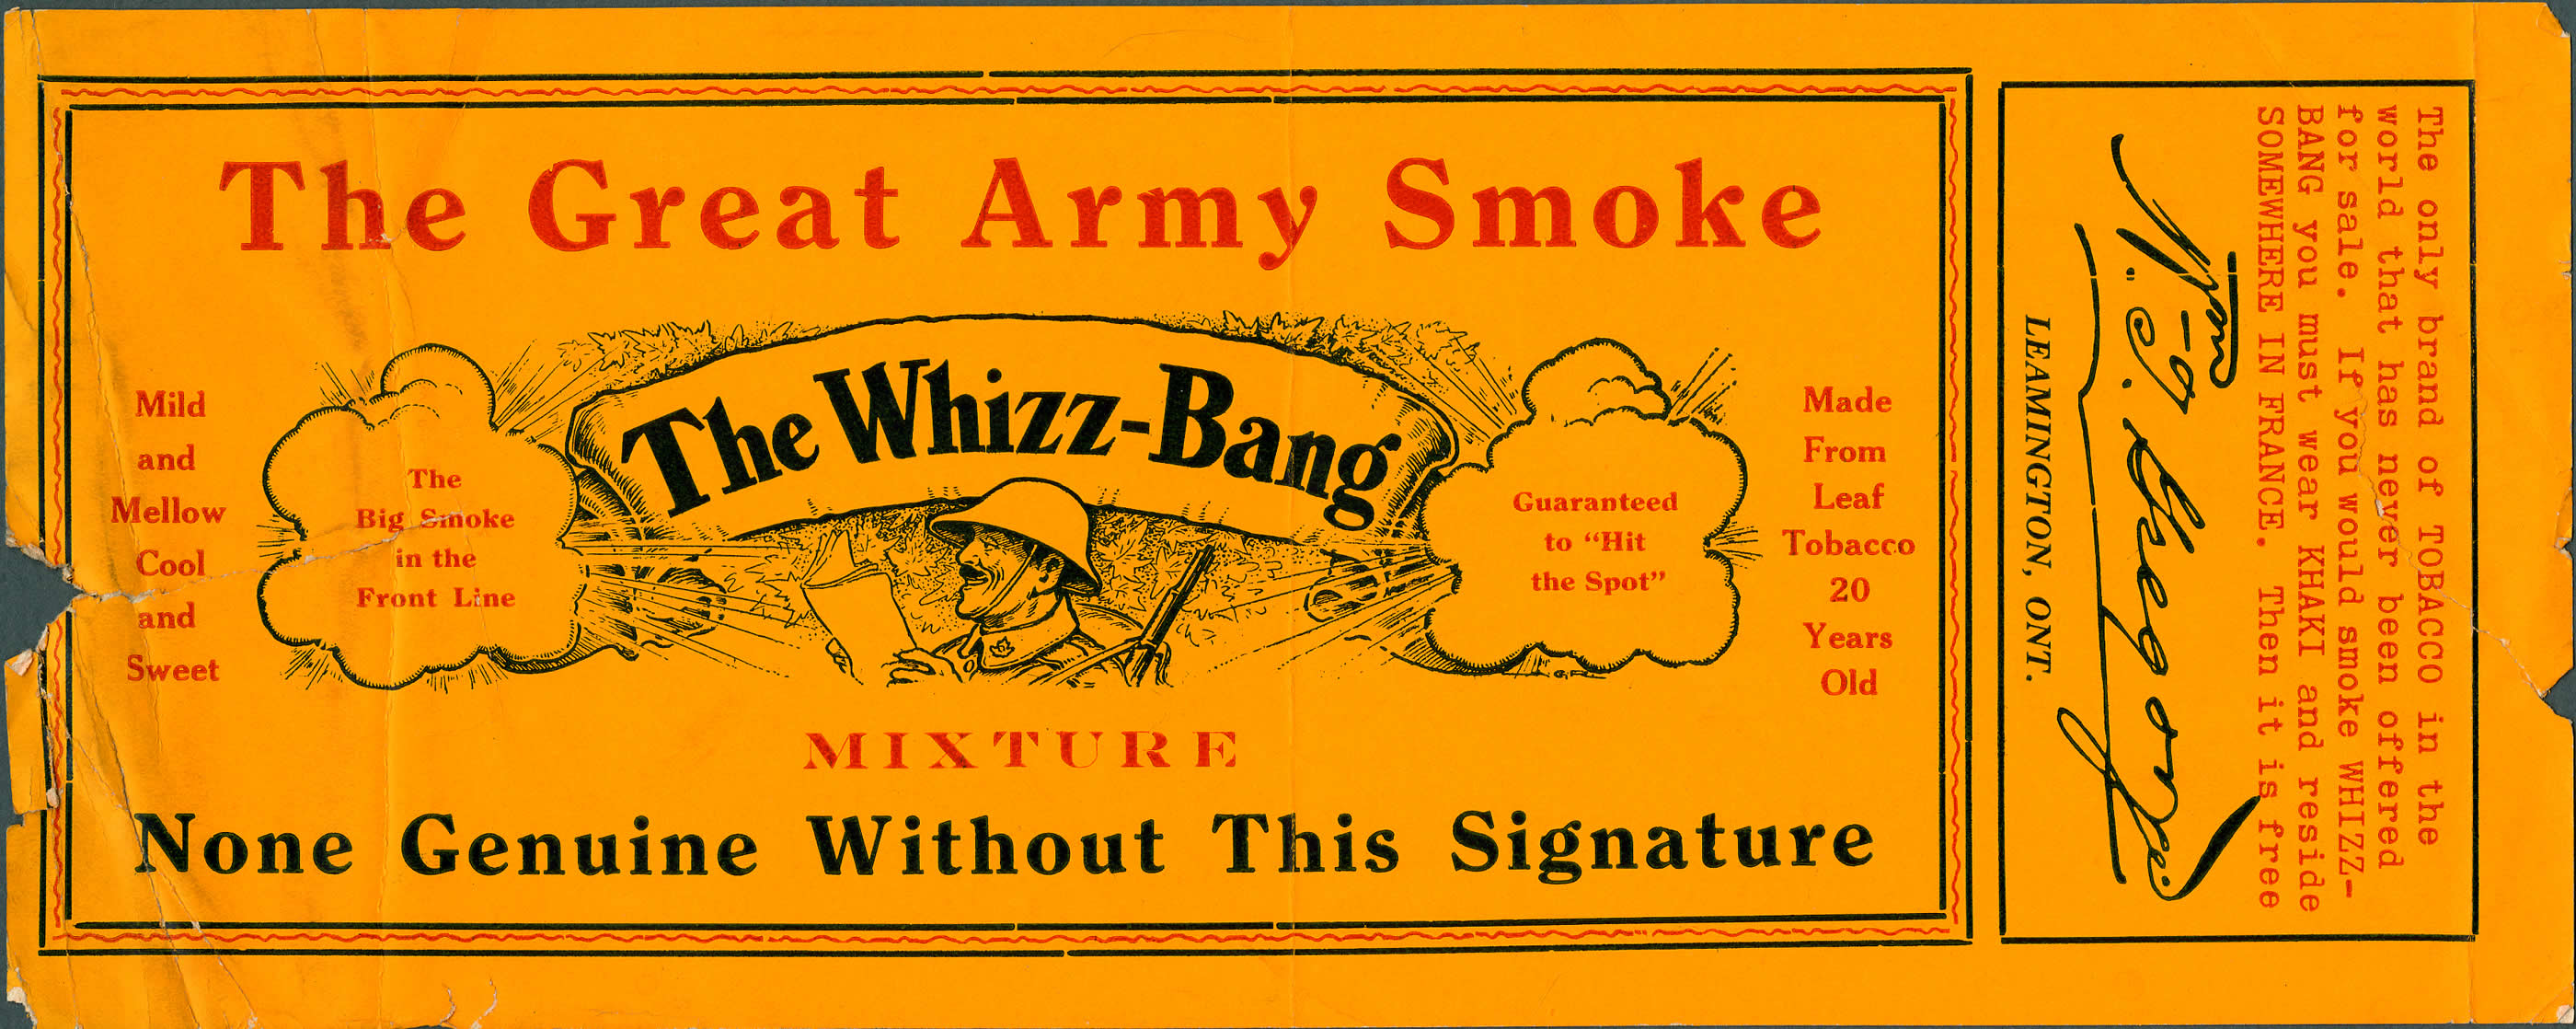 The Great Army Smoke